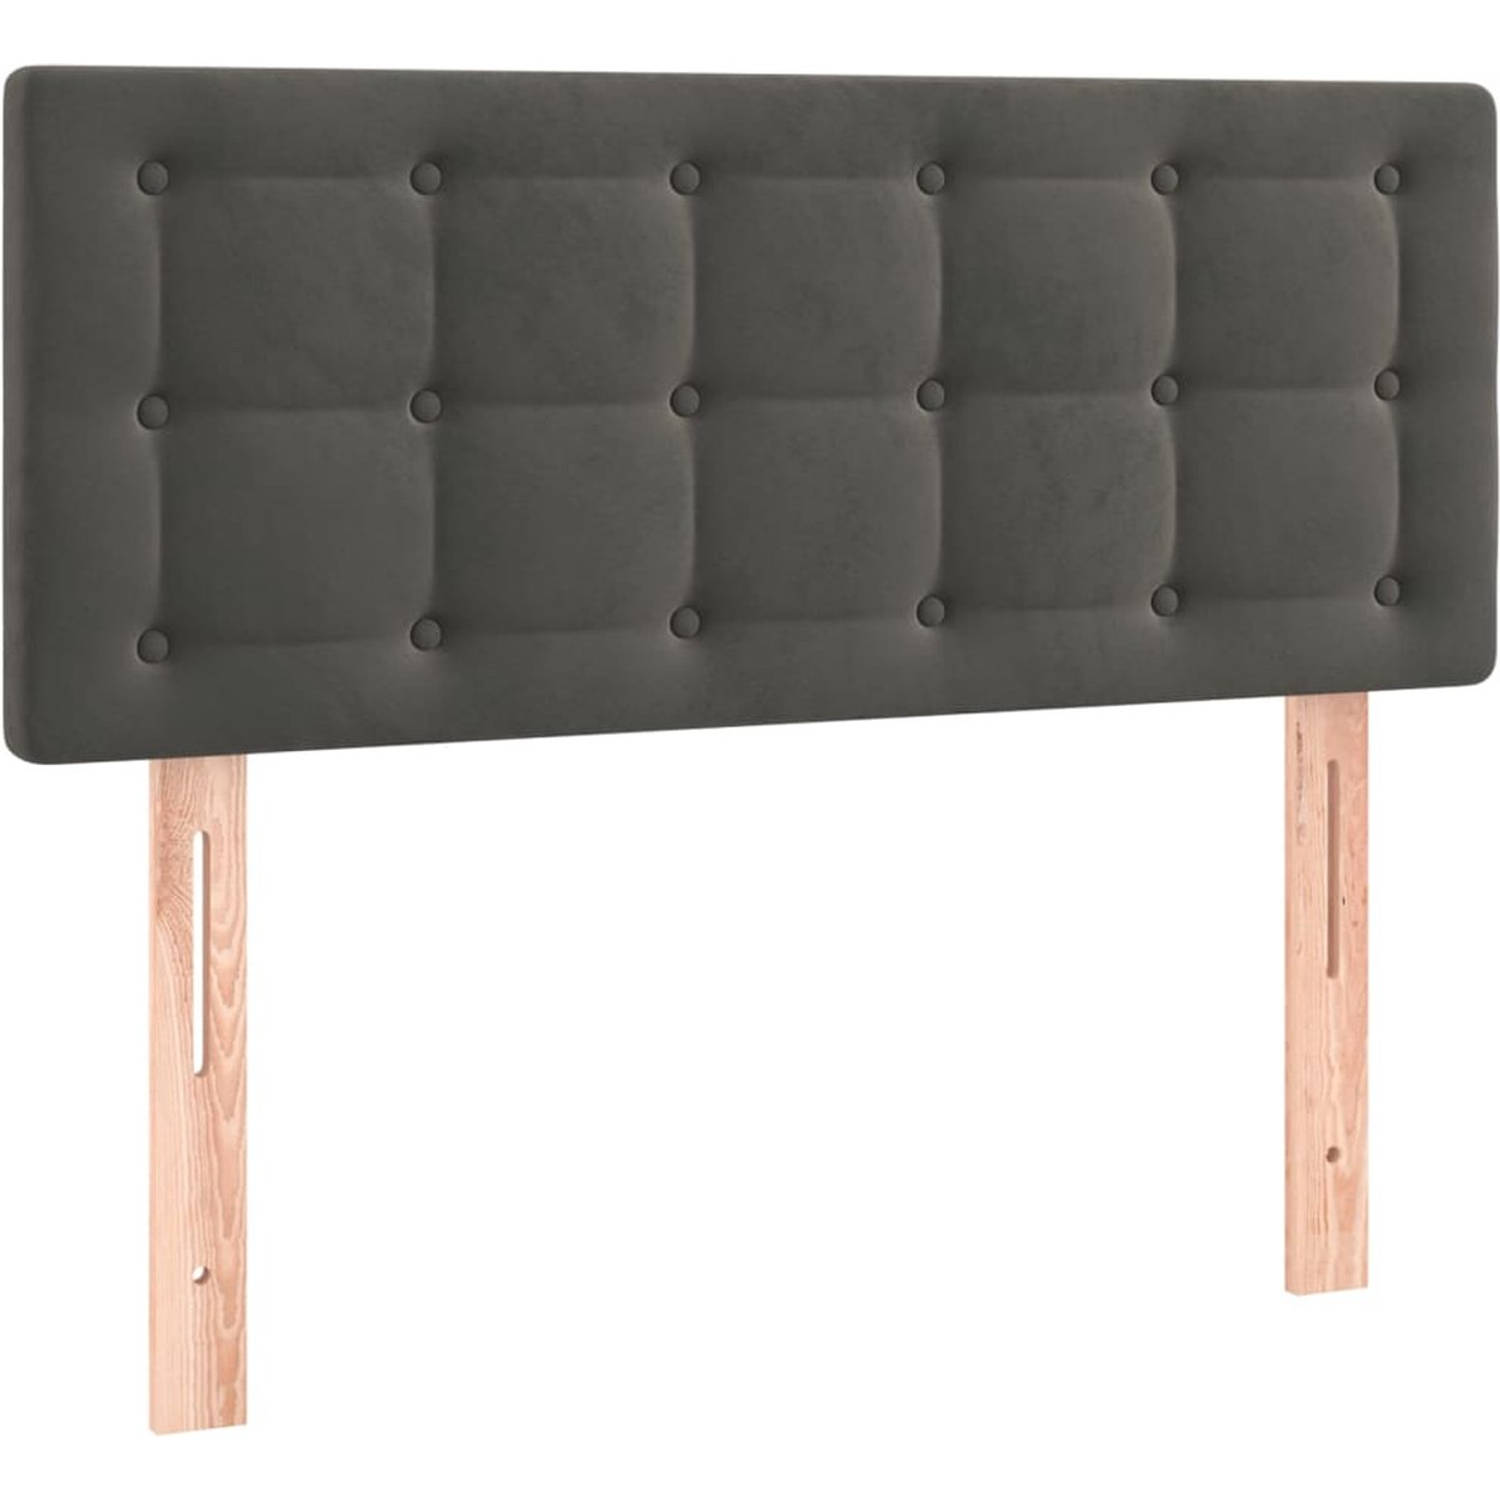 The Living Store The Living Store Boxspringbed - Donkergrijs - 203 x 80 x 78/88 cm - Fluweel - Hoofdbord - Pocketvering